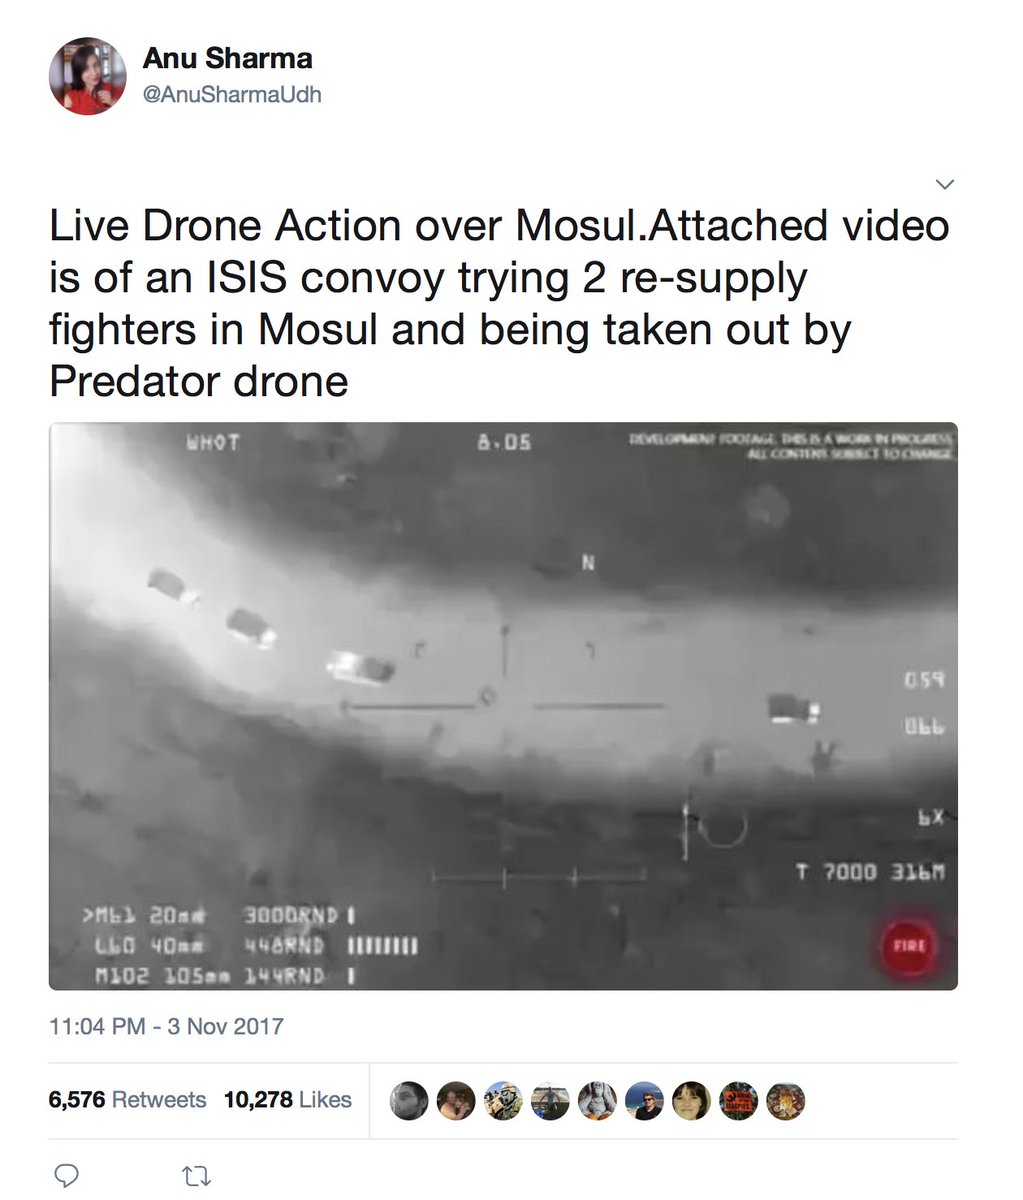 A very similar image had been used in this tweet two weeks earlier by a journalist claiming to show it was a Predator drone attacking an ISIS convoy, something I had dug into at the time.  #InternationalFactCheckingDay